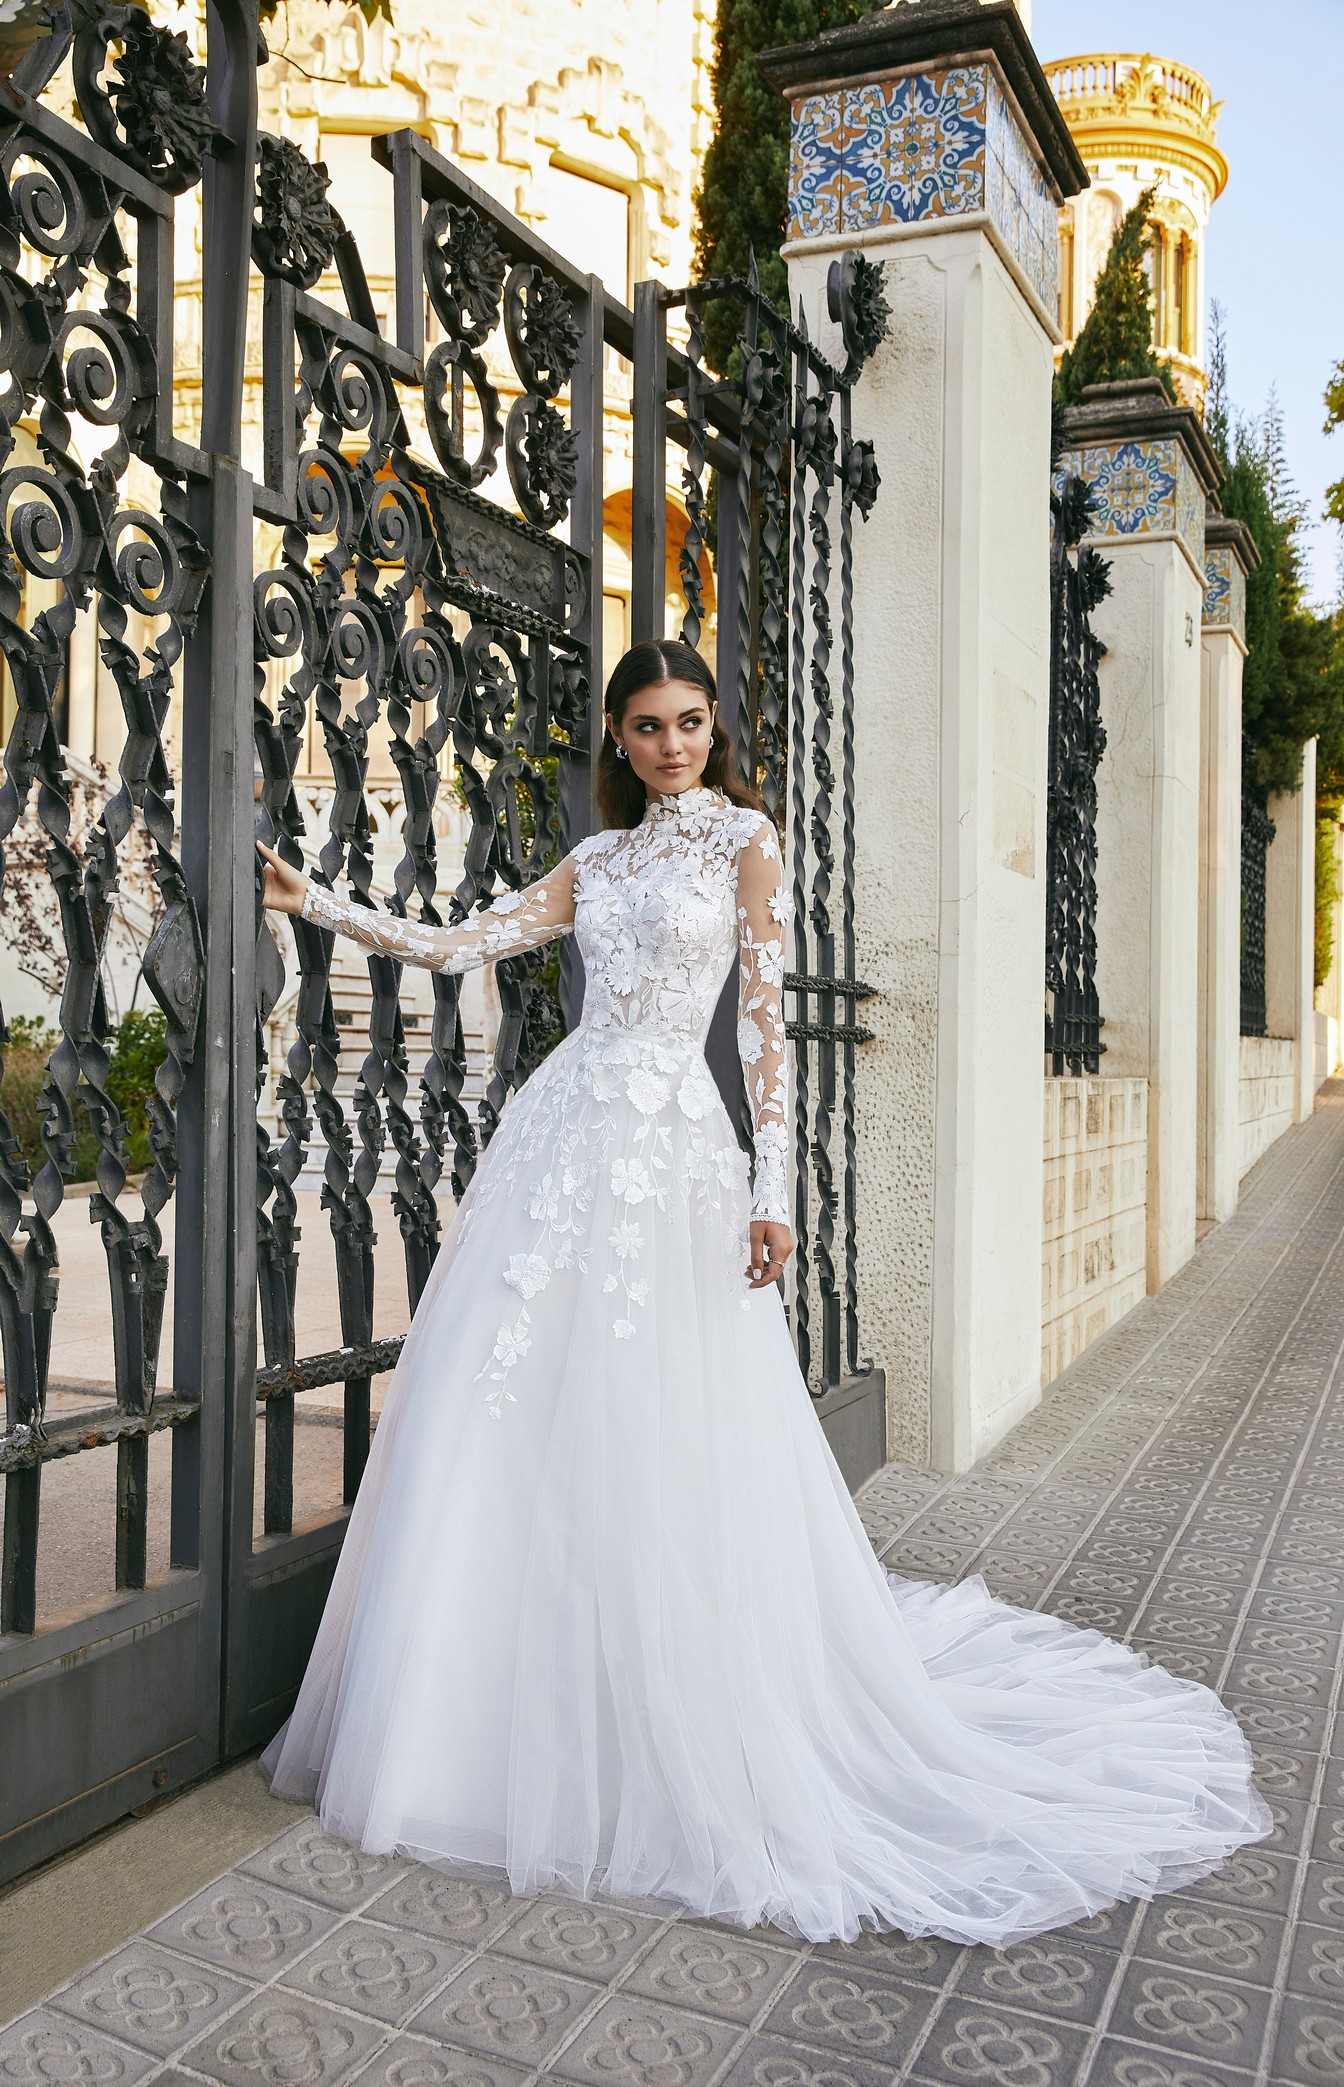 Model in Ronald Joyce wedding dress style 69717, a high neck ballgown with lace illusion neckline and sleeves, 3D flowers and an organza and tulle skirt